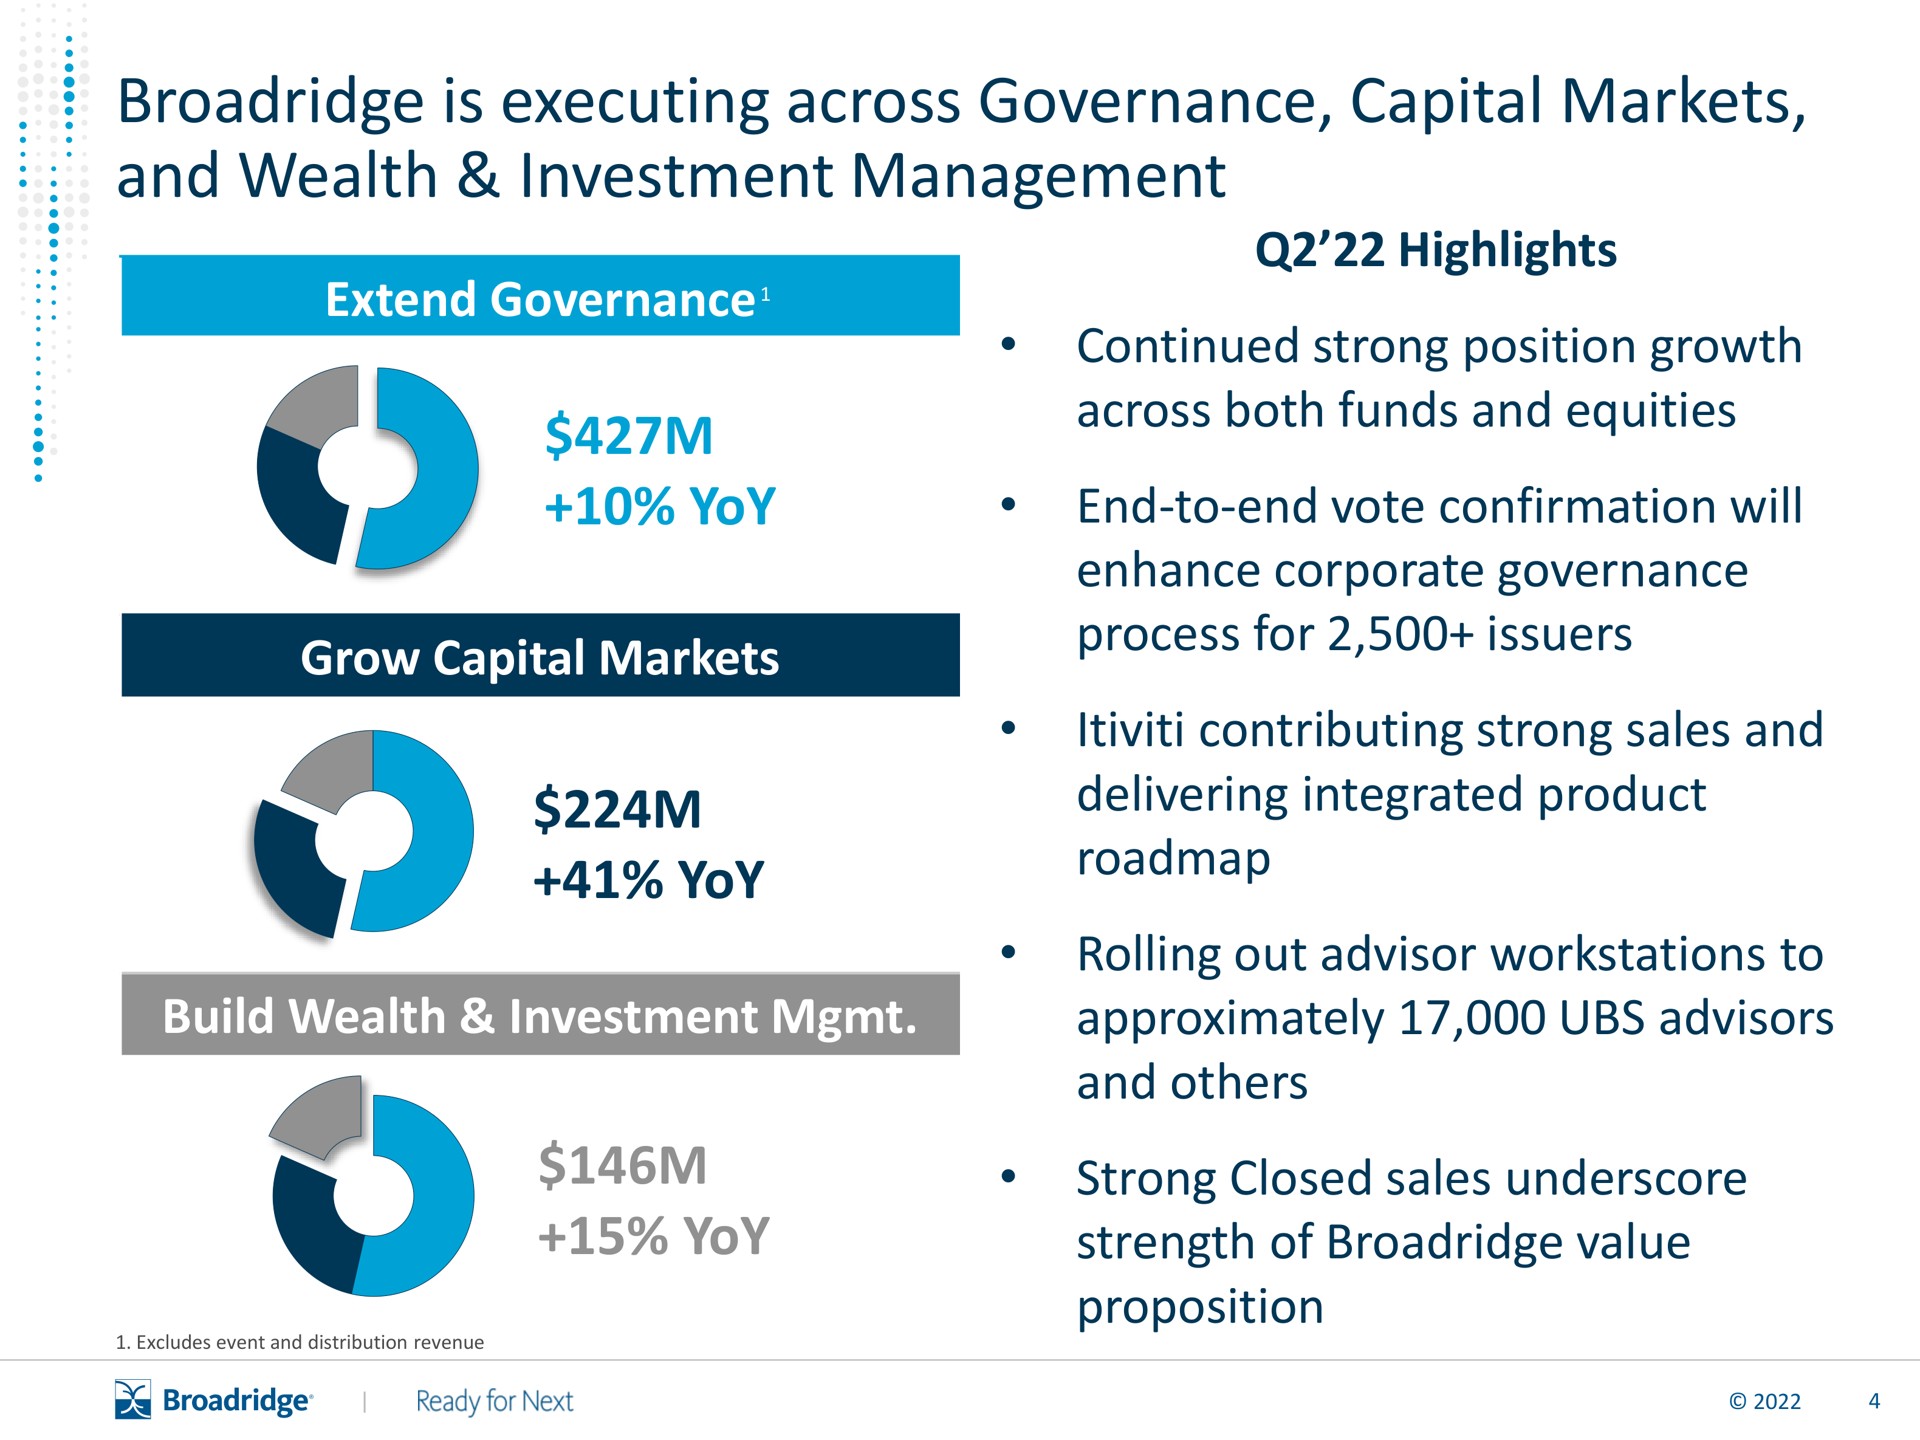 is executing across governance capital markets and wealth investment management extend governance yoy grow capital markets yoy build wealth investment yoy highlights continued strong position growth across both funds and equities end to end vote confirmation will enhance corporate governance process for issuers contributing strong sales and delivering integrated product rolling out advisor to approximately advisors and strong closed sales underscore strength of value proposition | Broadridge Financial Solutions